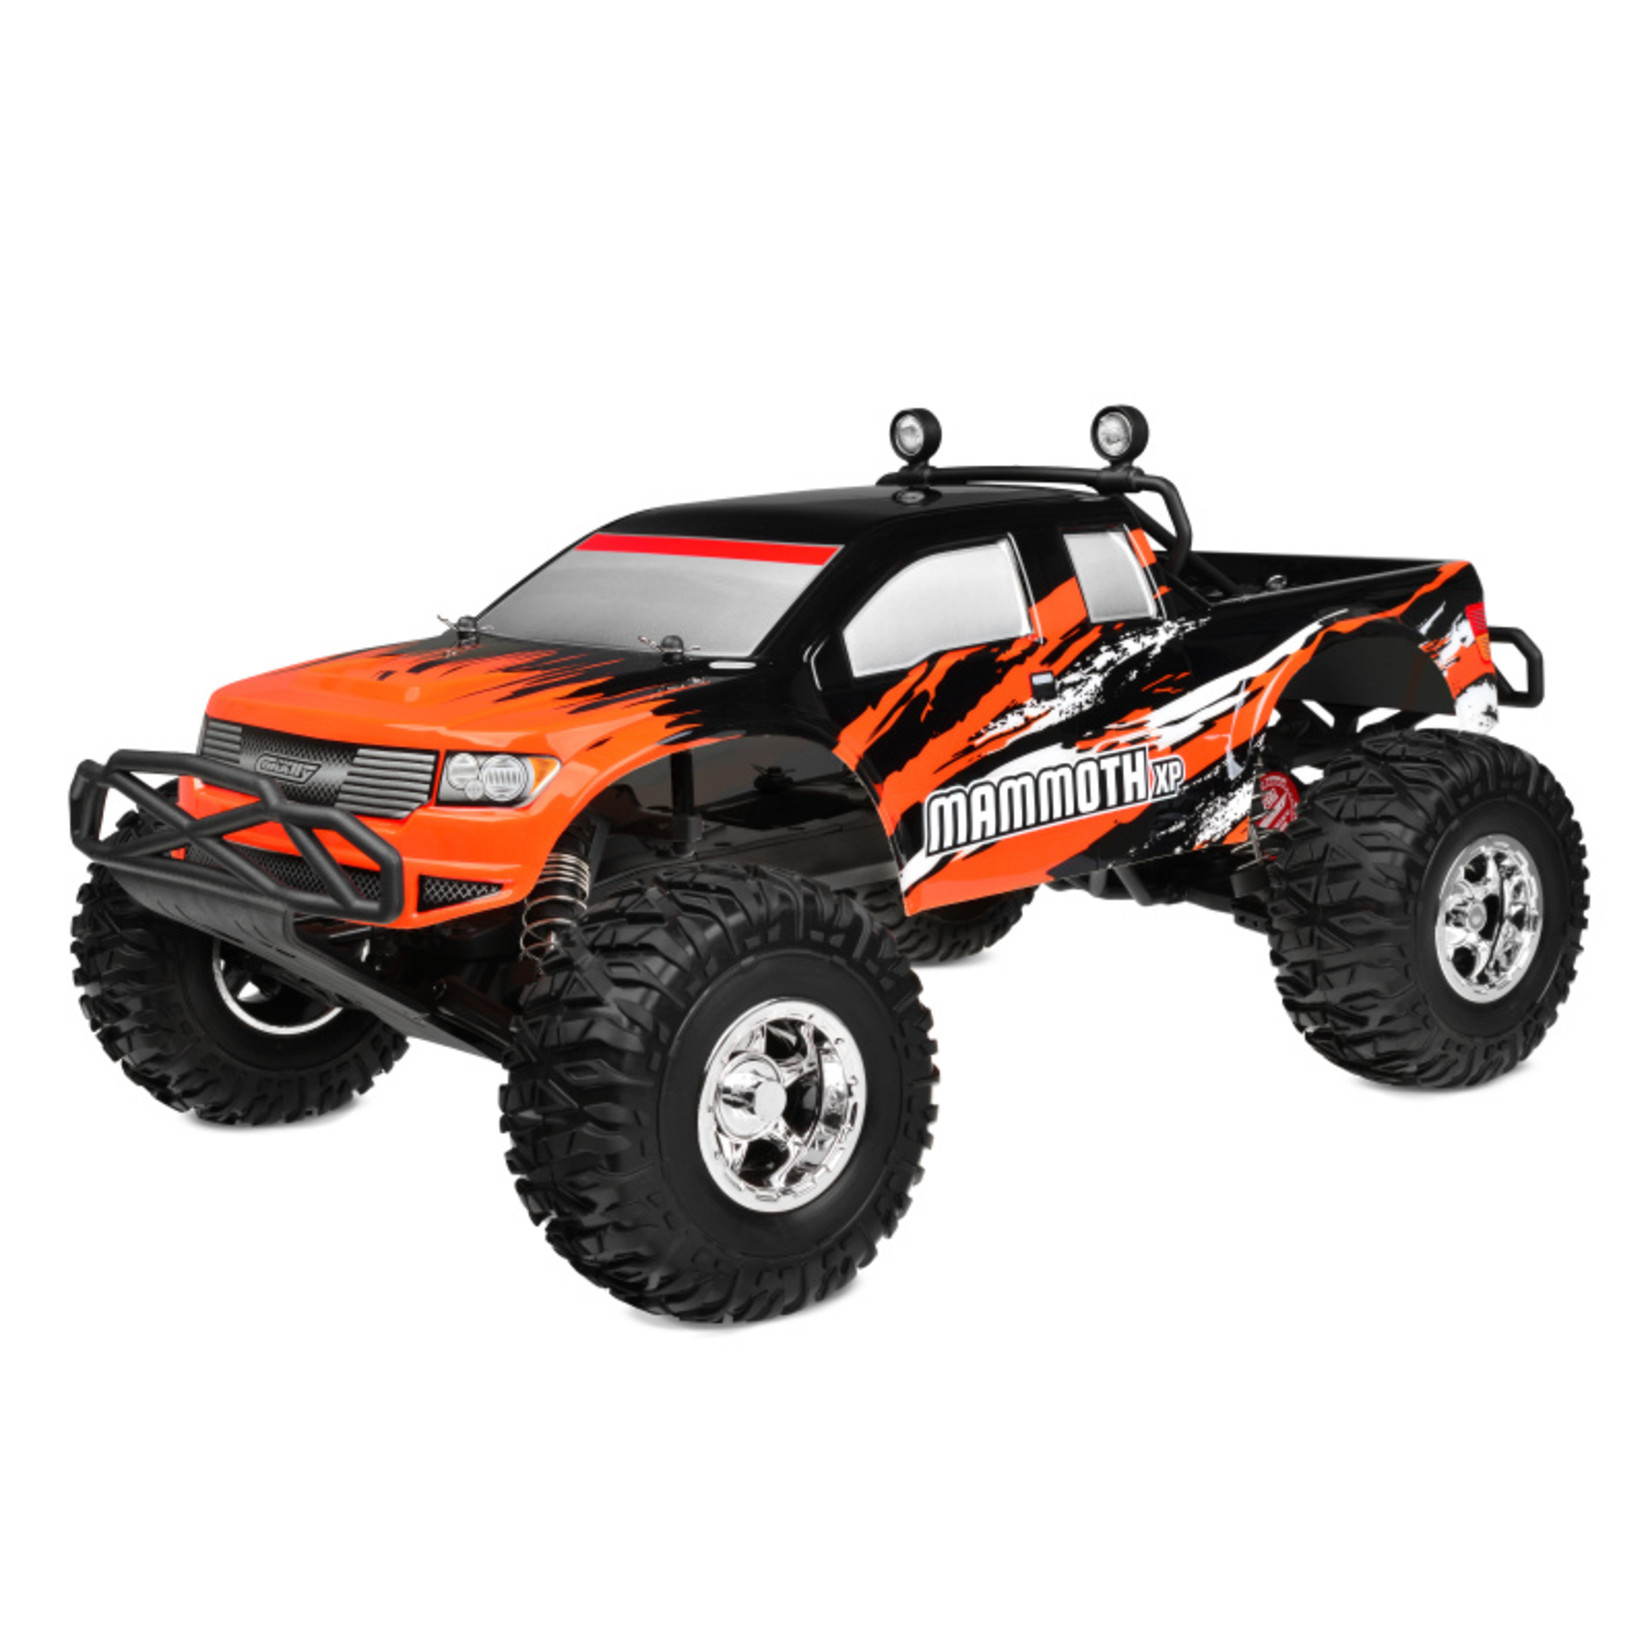 Corally (Team Corally) 1/10 Mammoth XP 2WD Desert Truck Brushless RTR (No